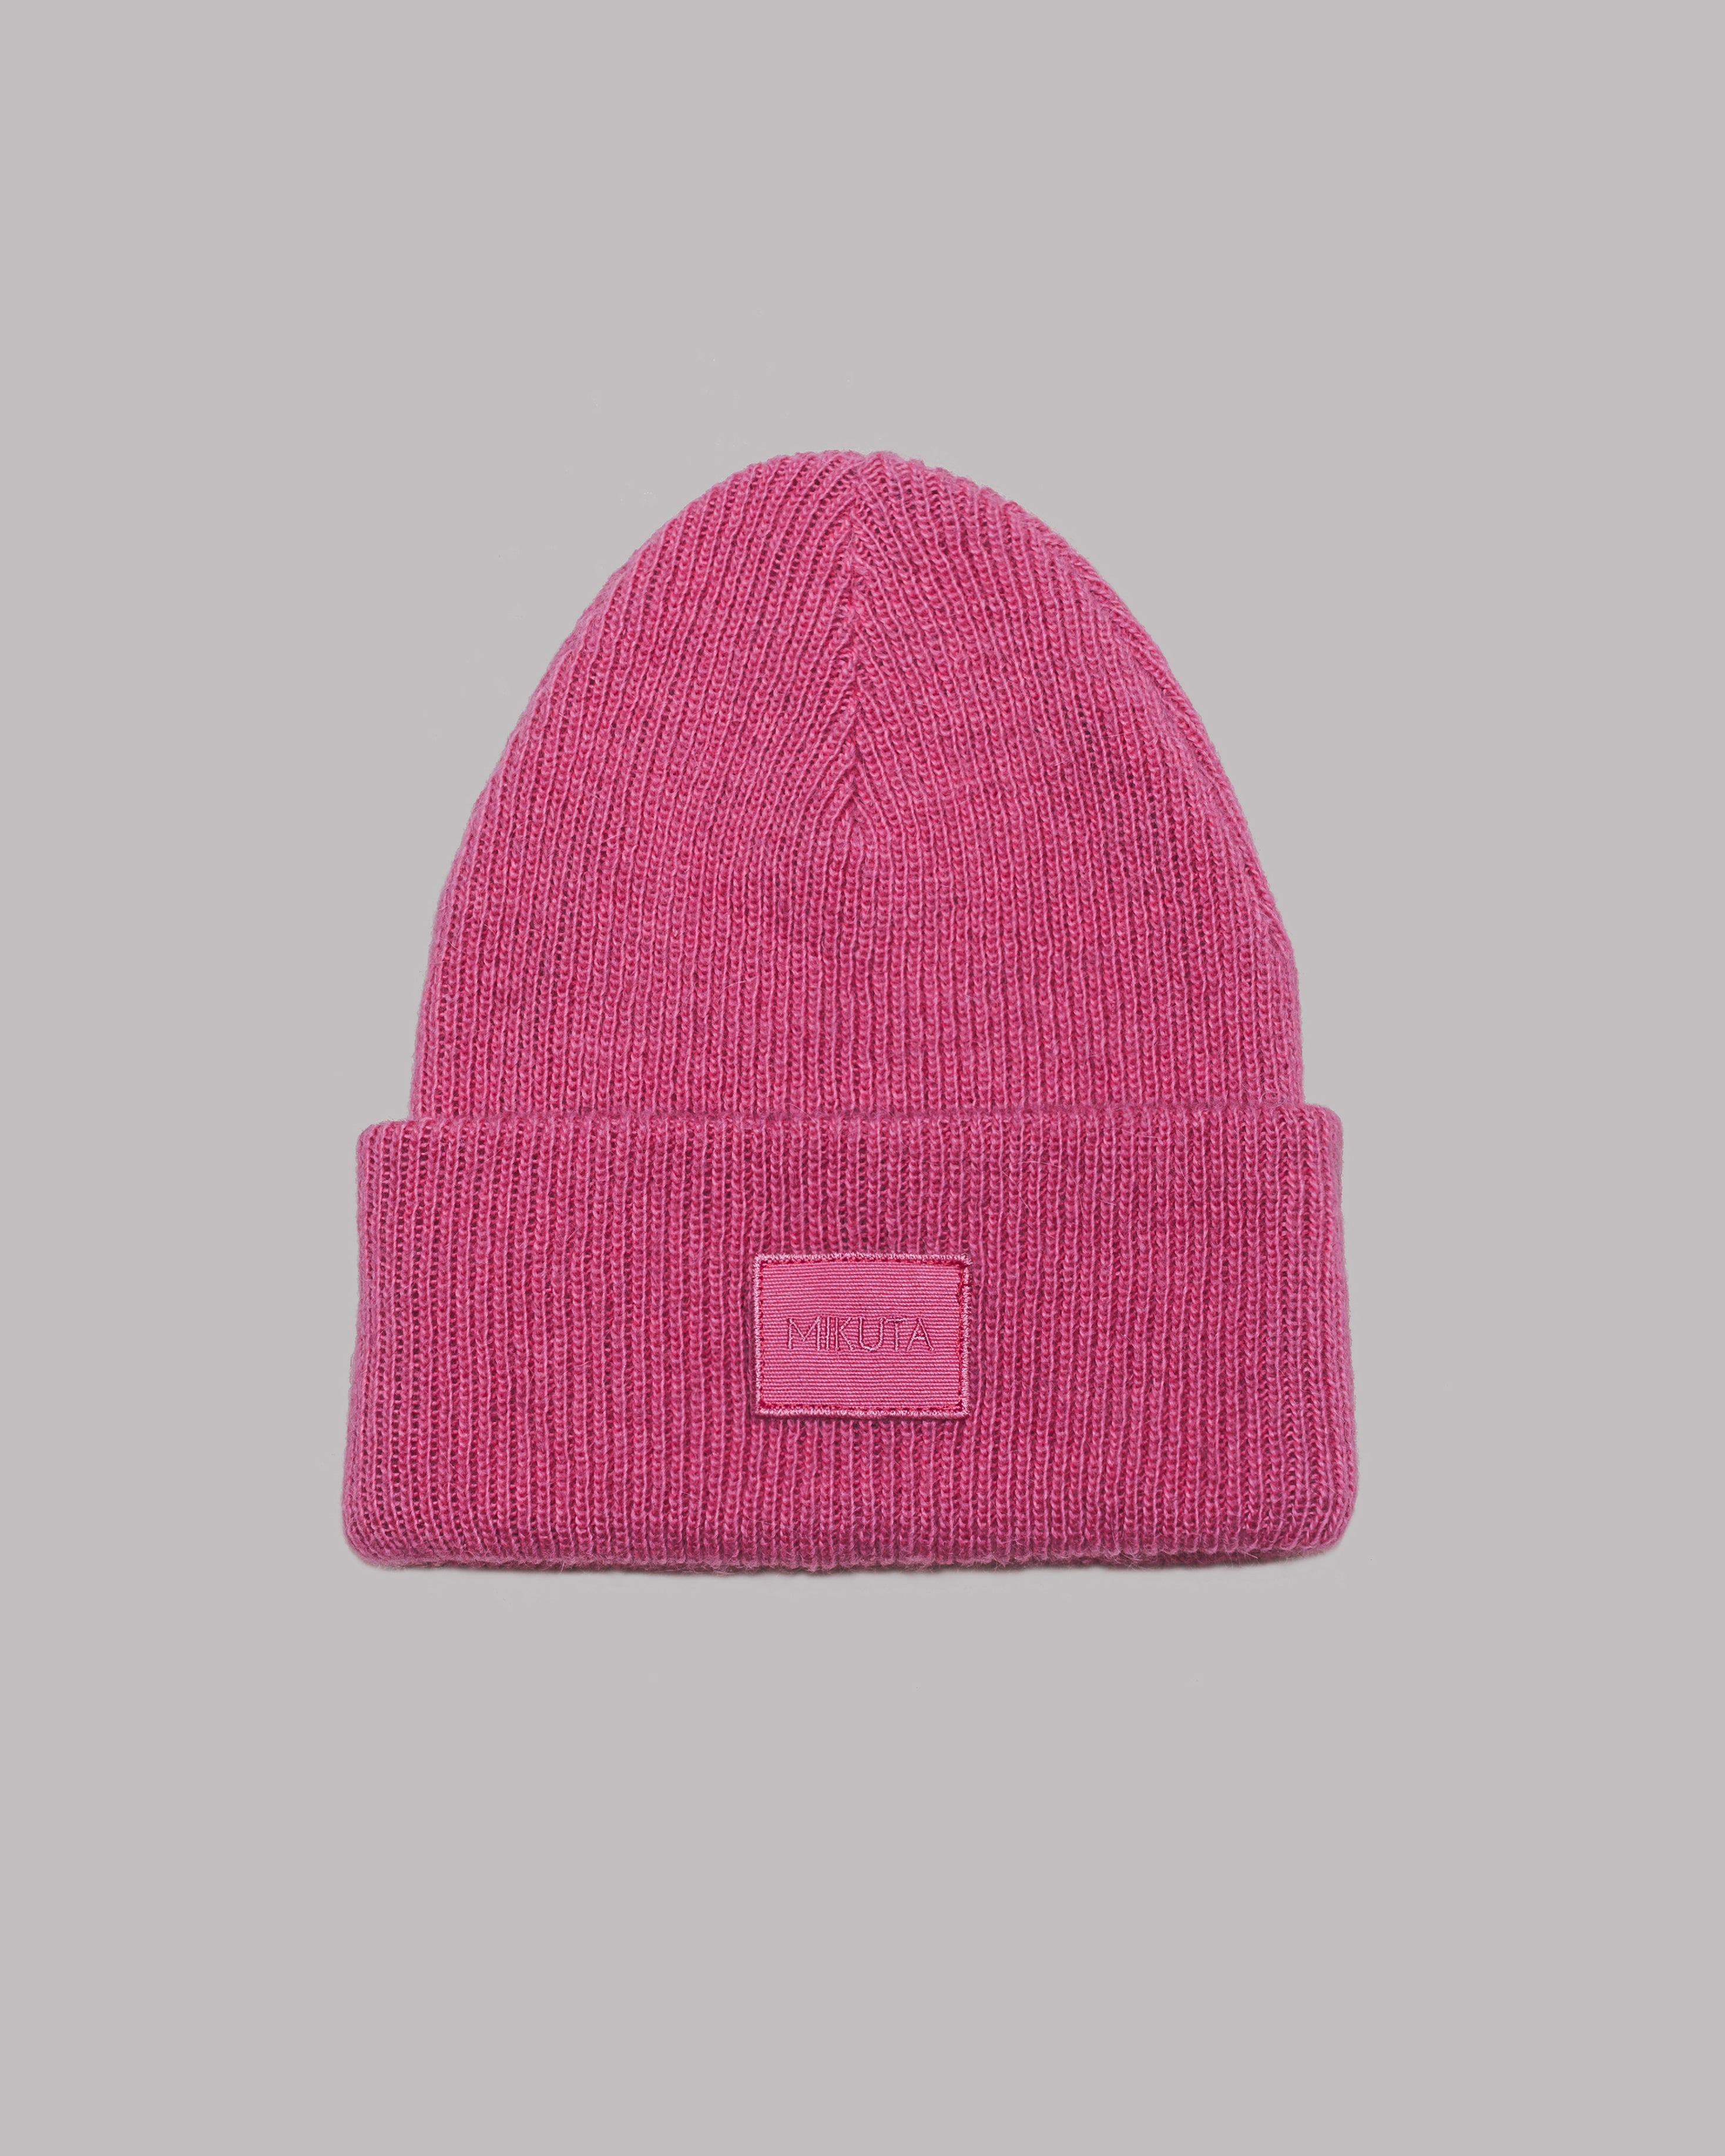 The Pink Knitted Beanie